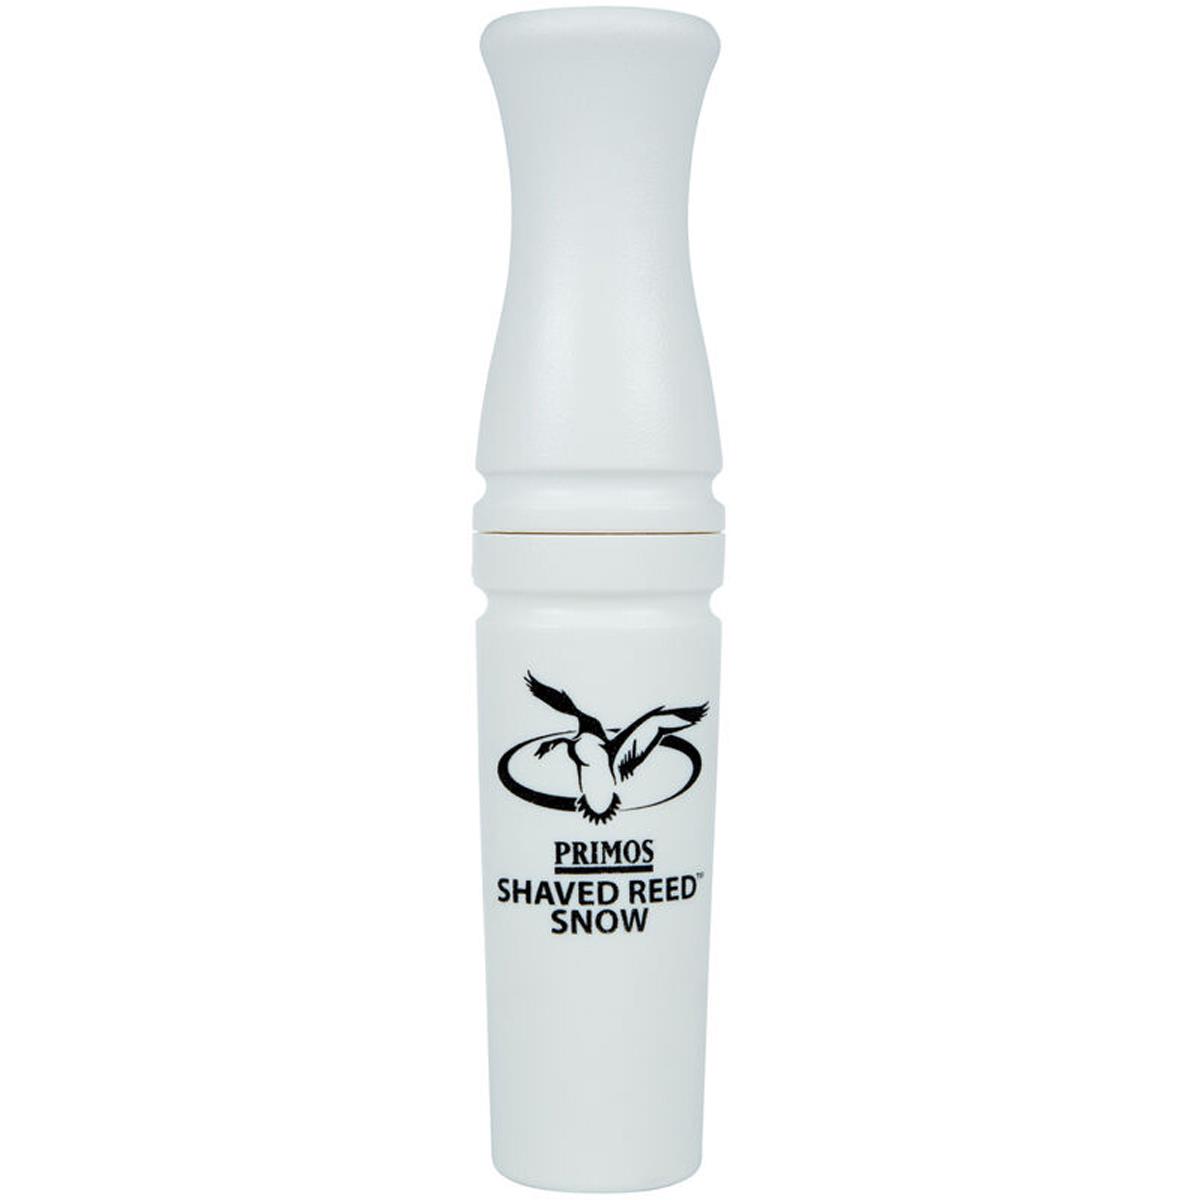 Image of Bushnell Shaved Reed Snow Goose Call